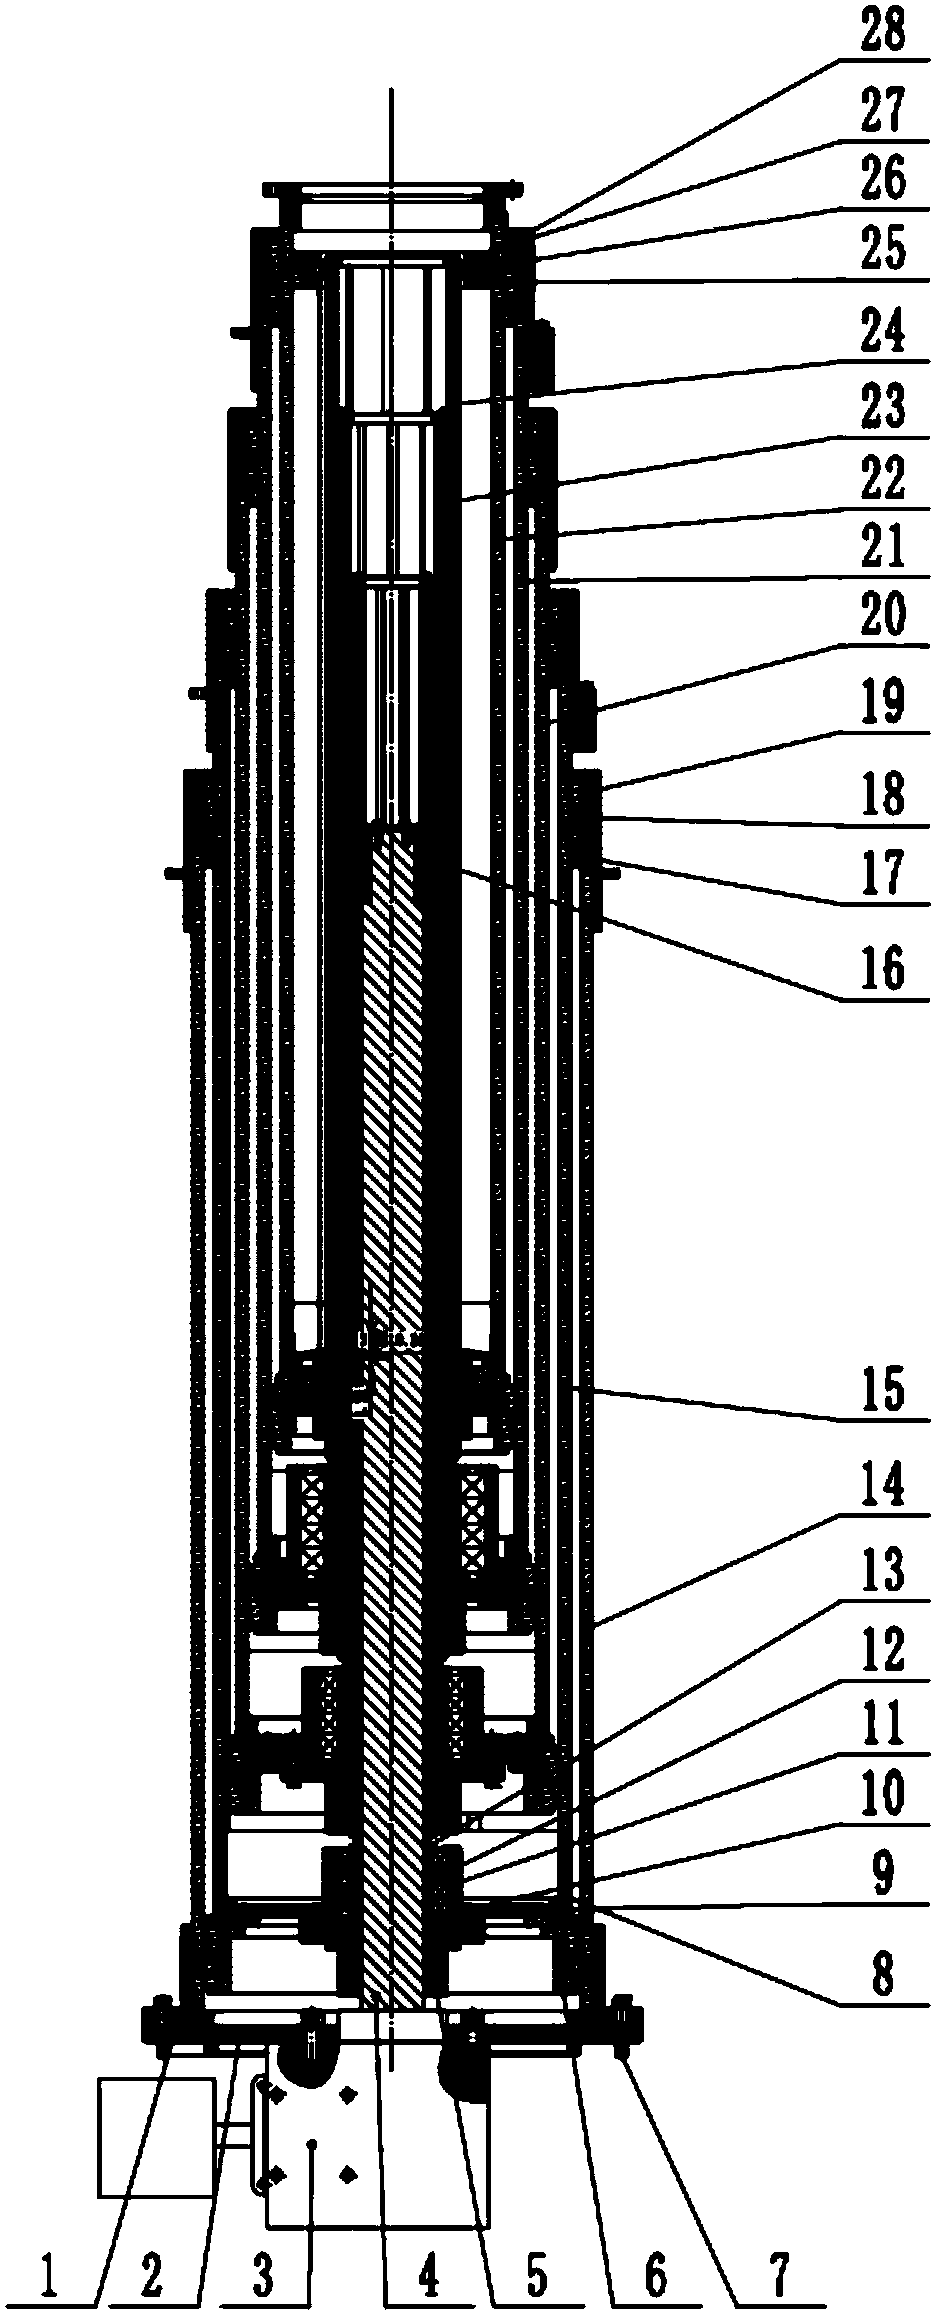 Multistage synchronous lifting device based on carbon fiber barrels